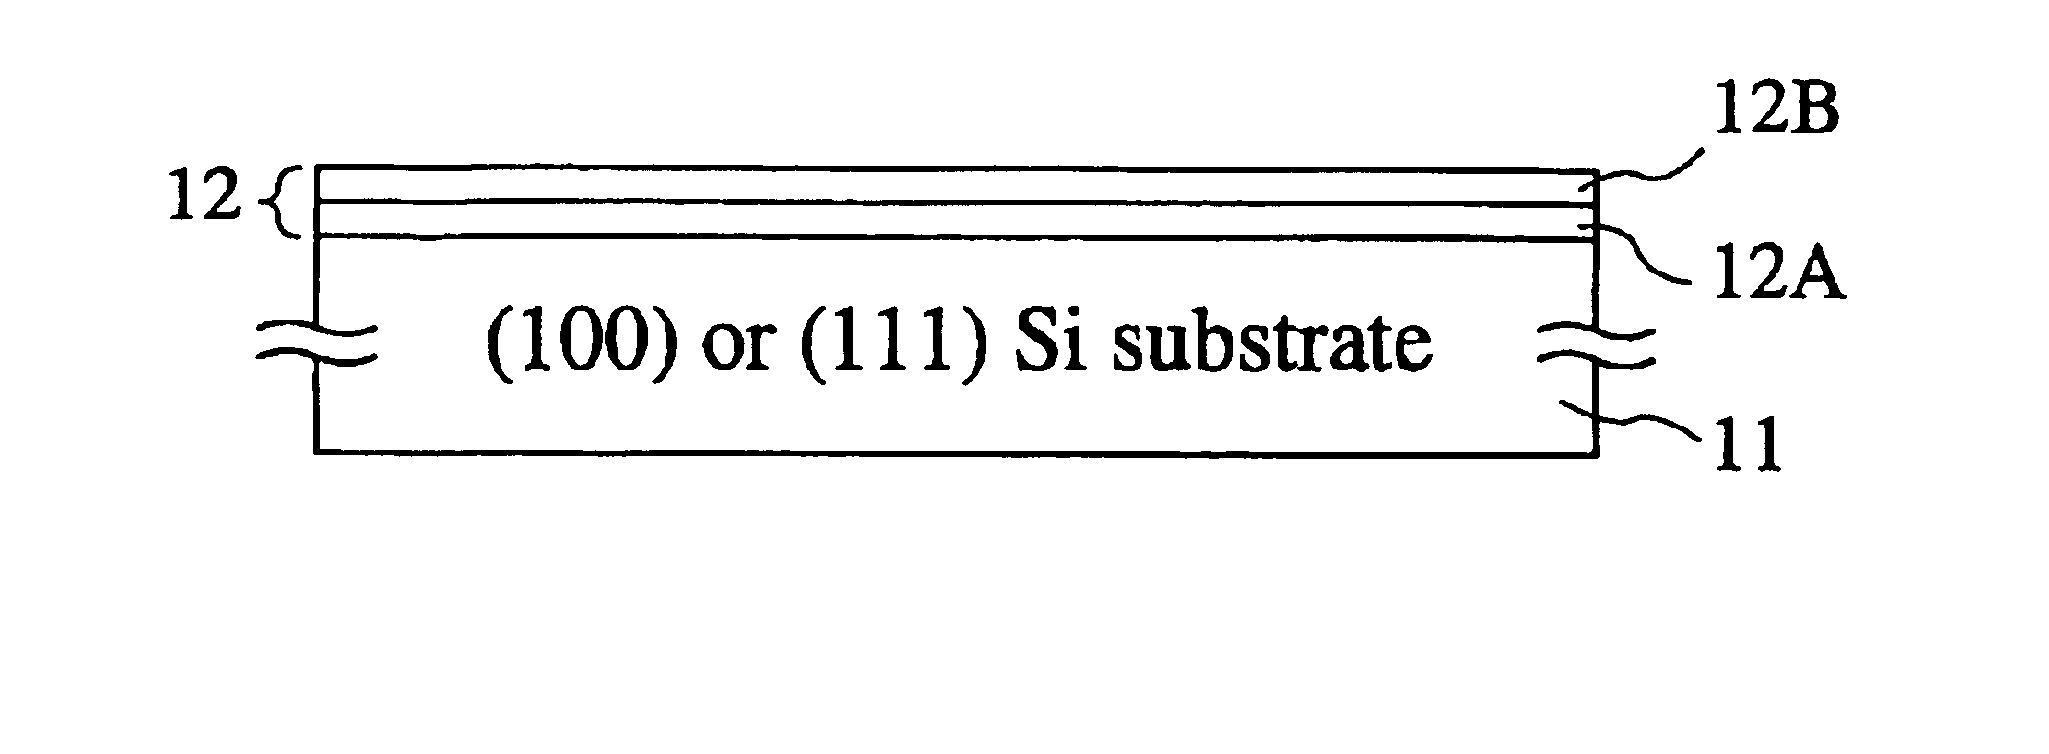 Semiconductor device formed on (111) surface of a Si crystal and fabrication process thereof